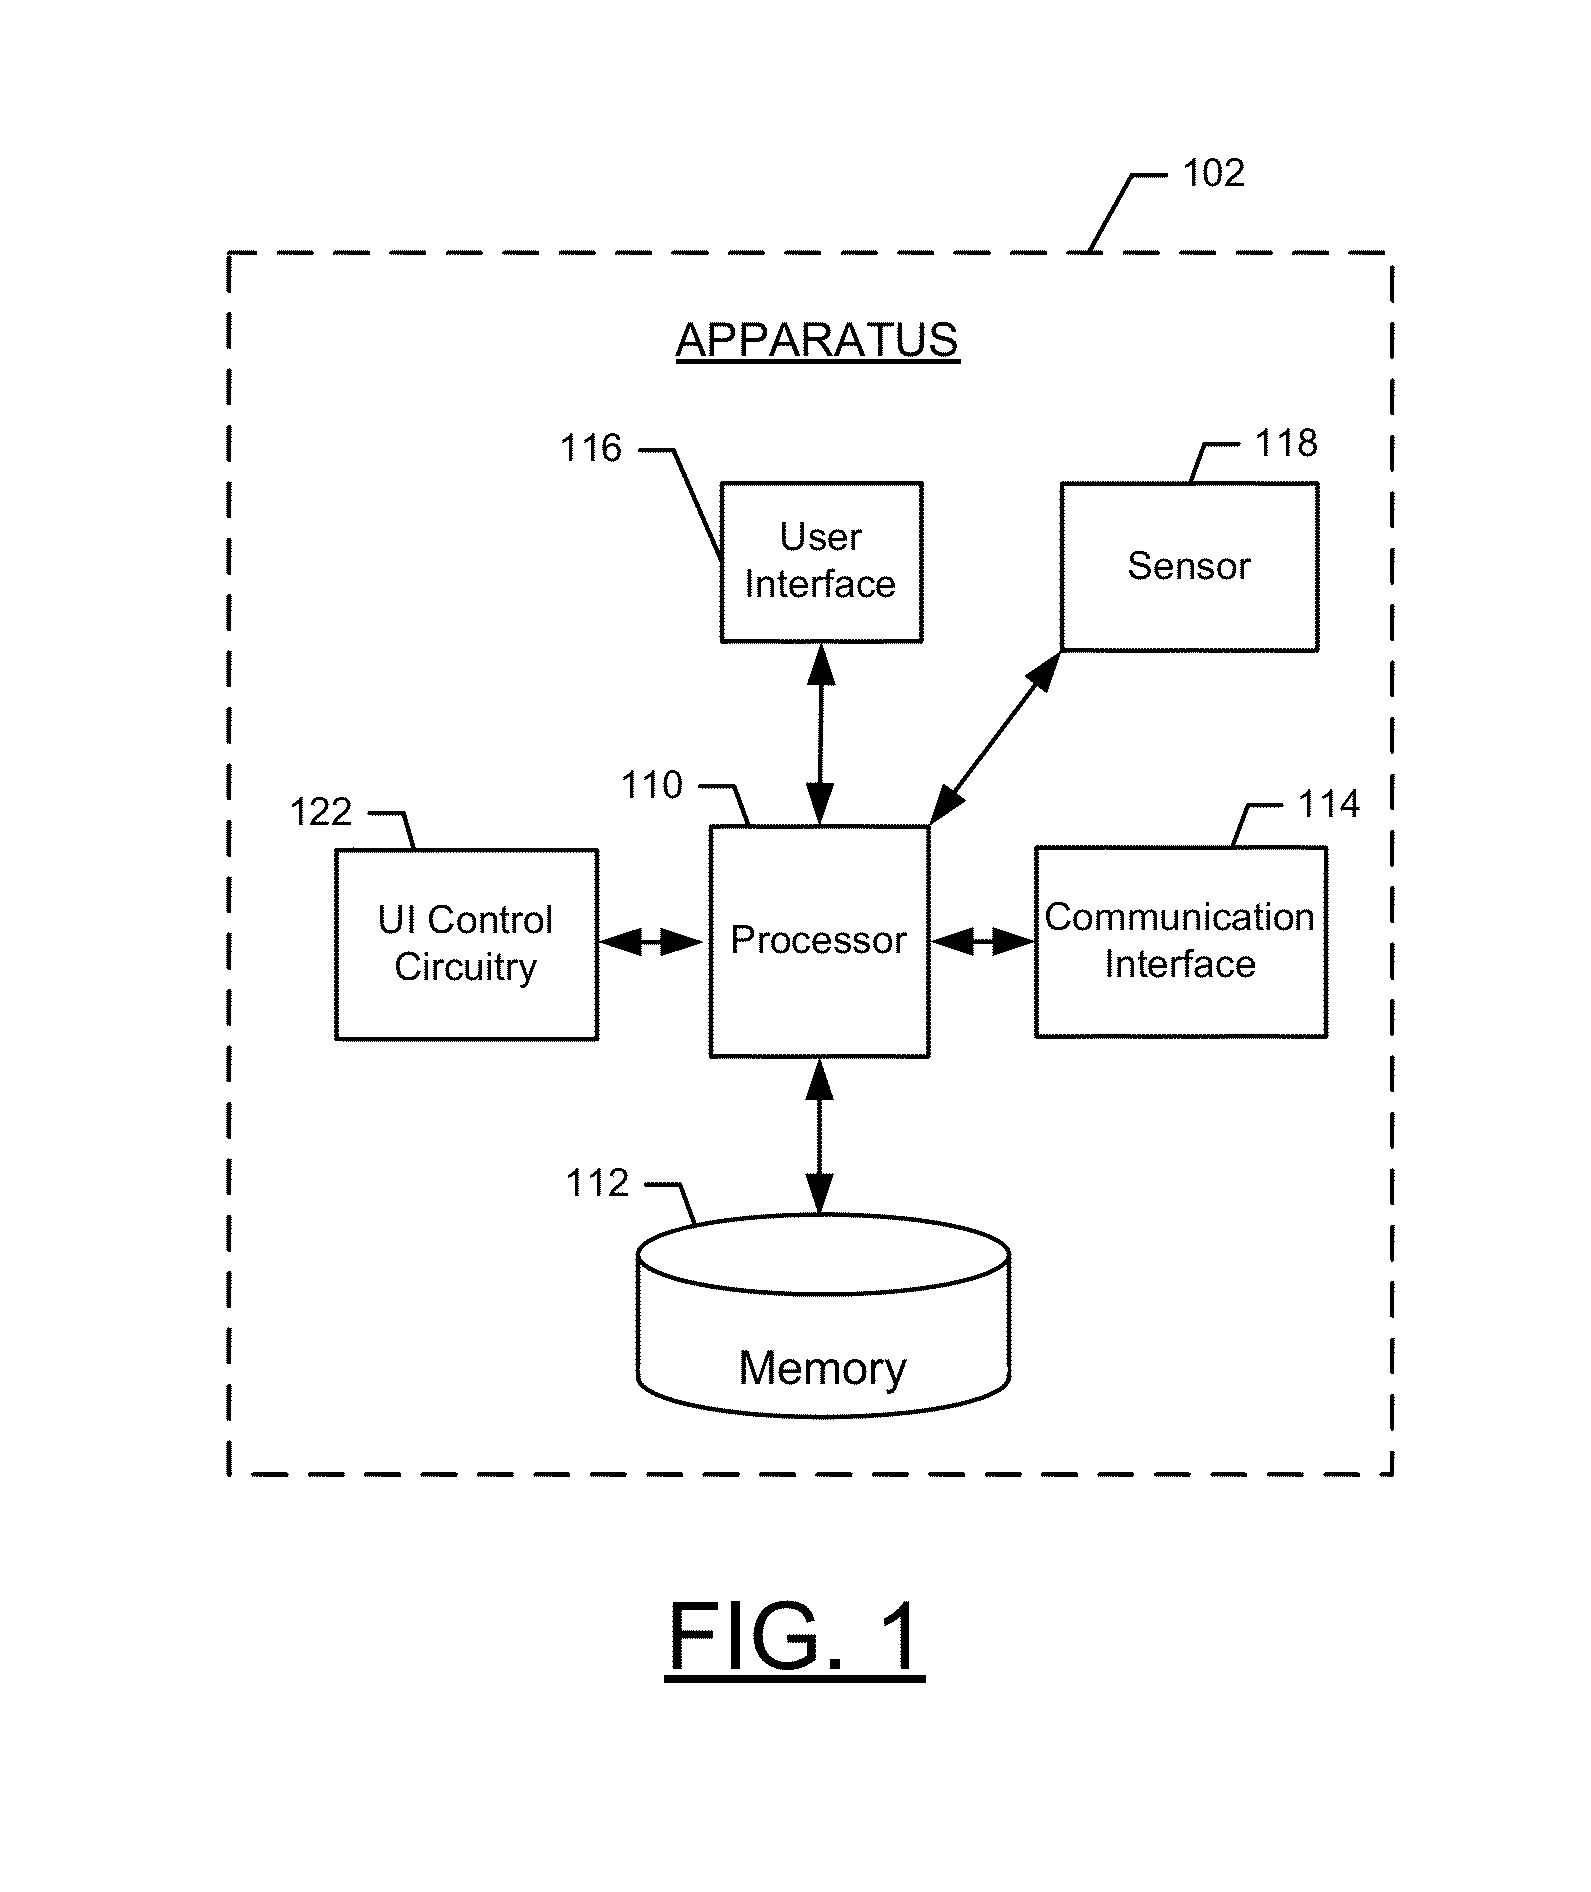 Method and apparatus for attracting a user's gaze to information in a non-intrusive manner